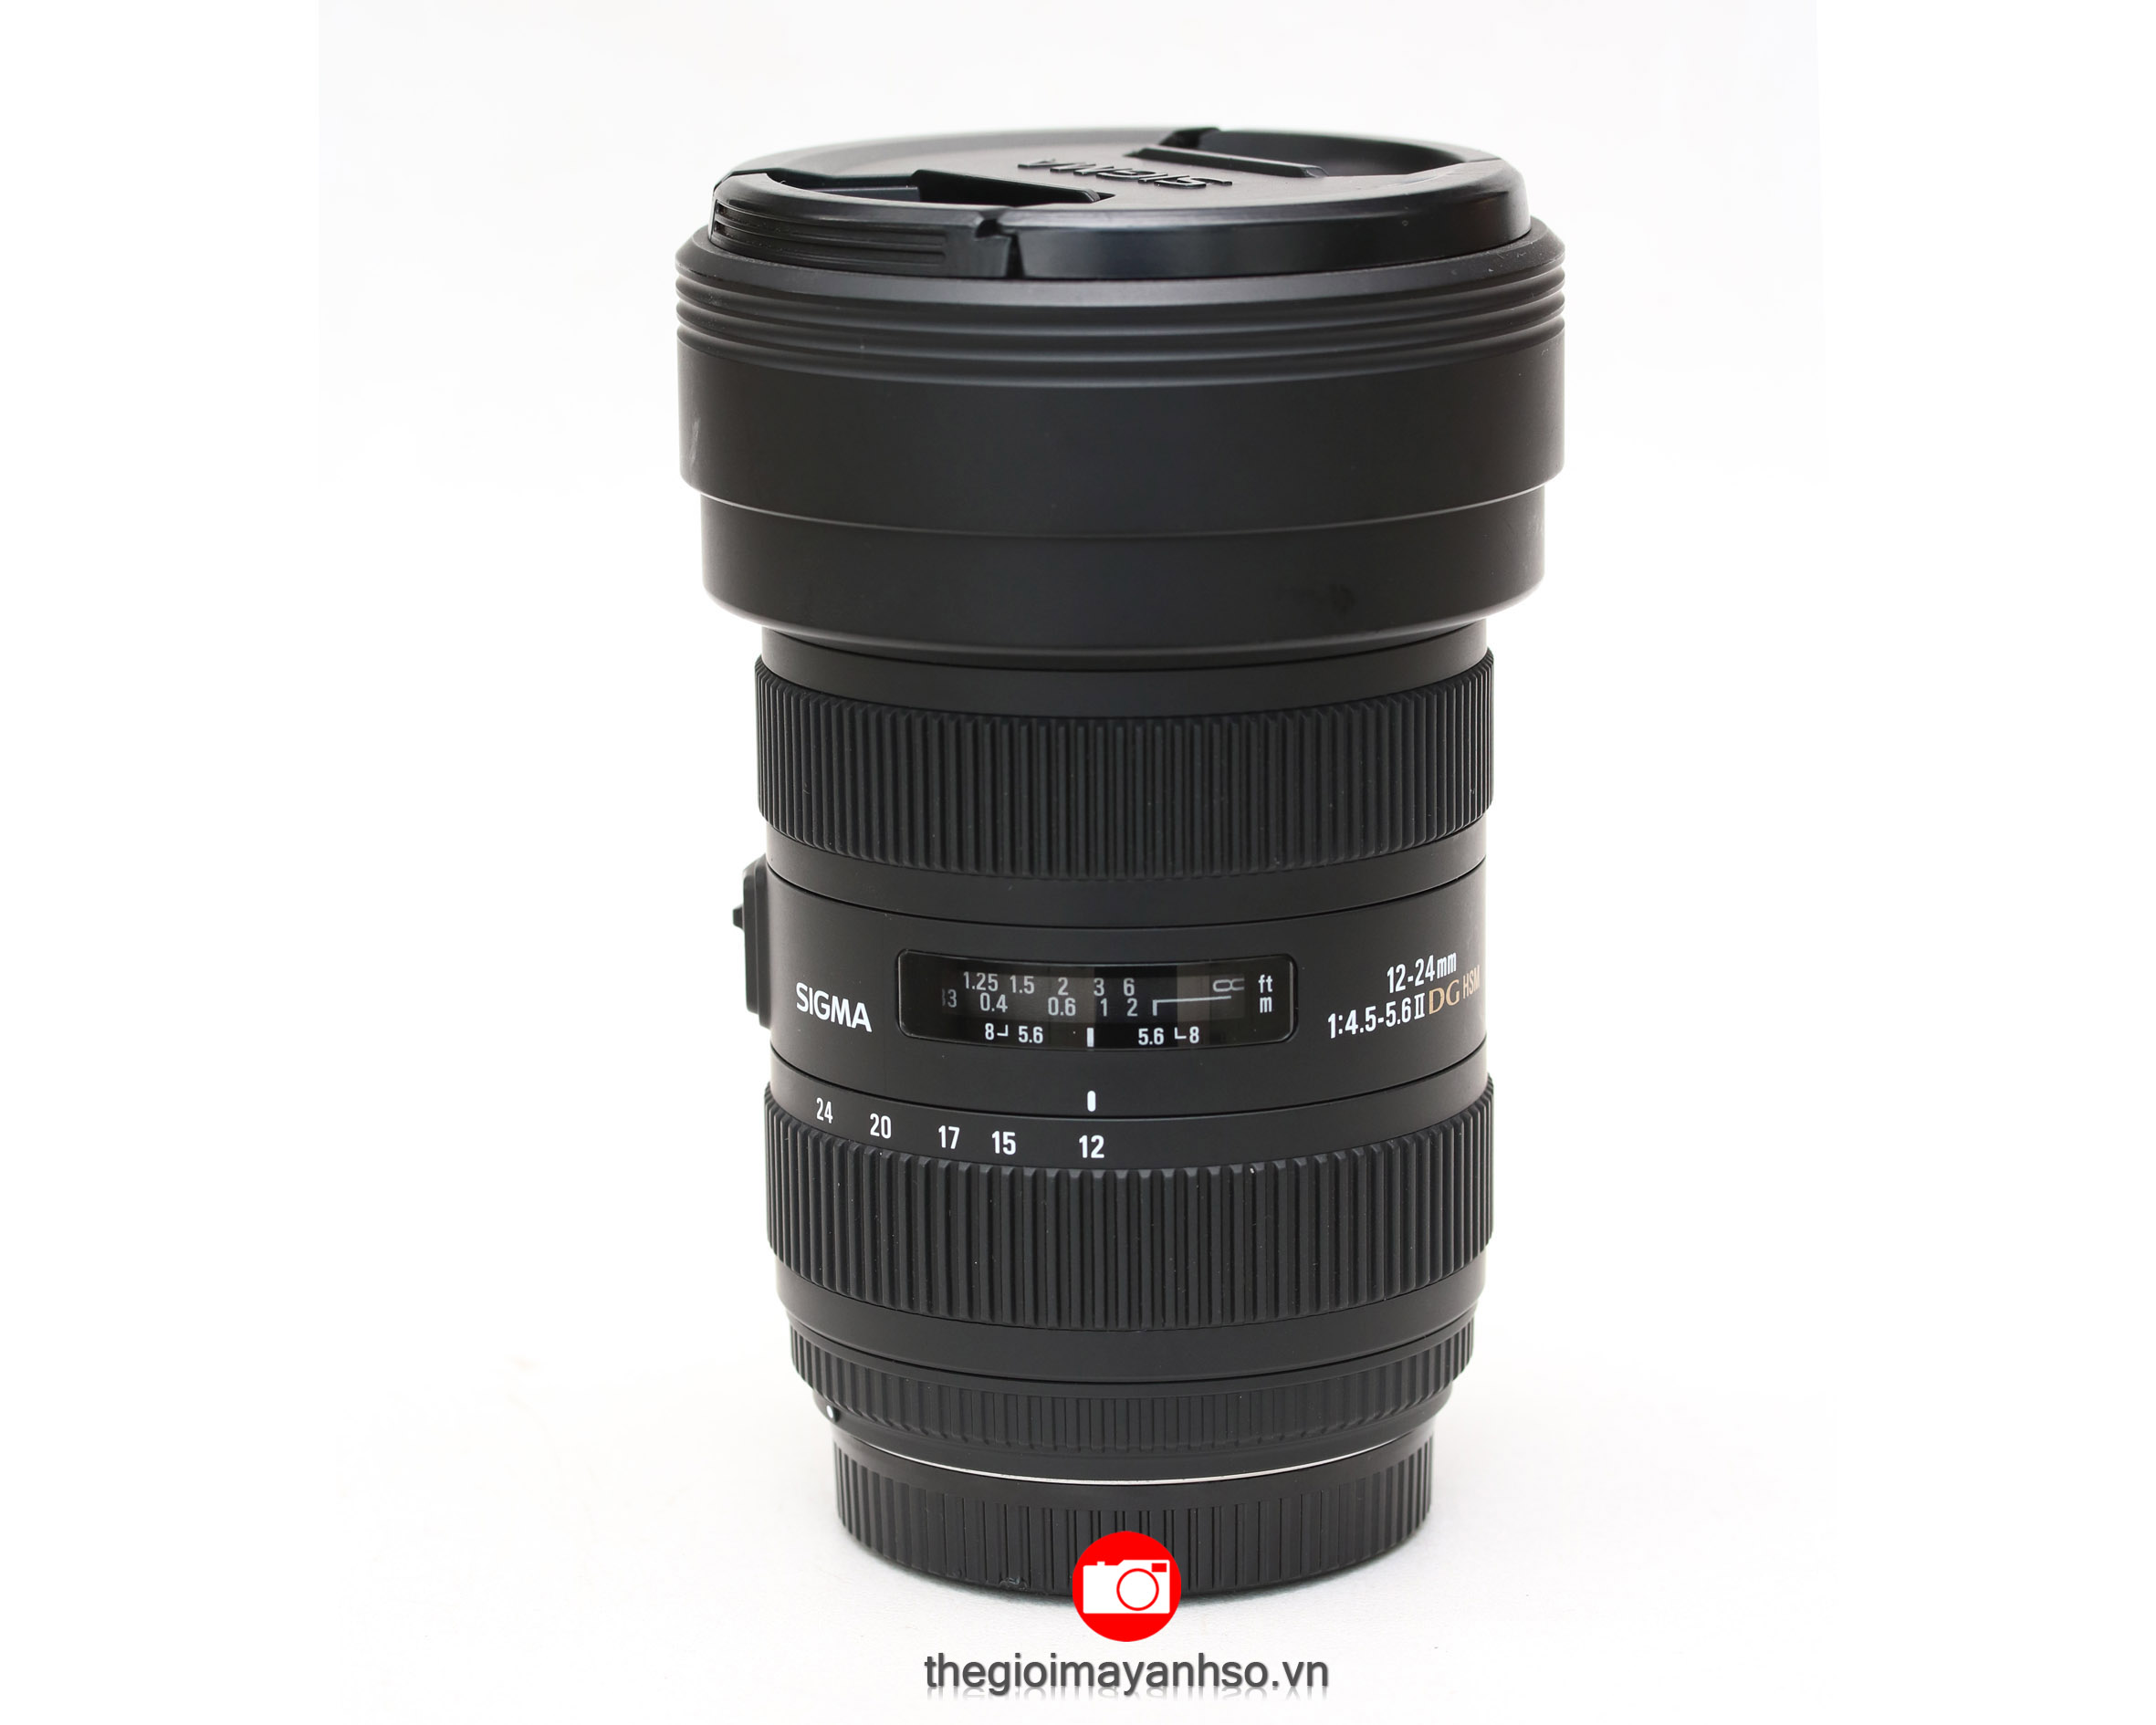 Sigma 12-24mm f/4.5-5.6 DG HSM II Lens for Canon